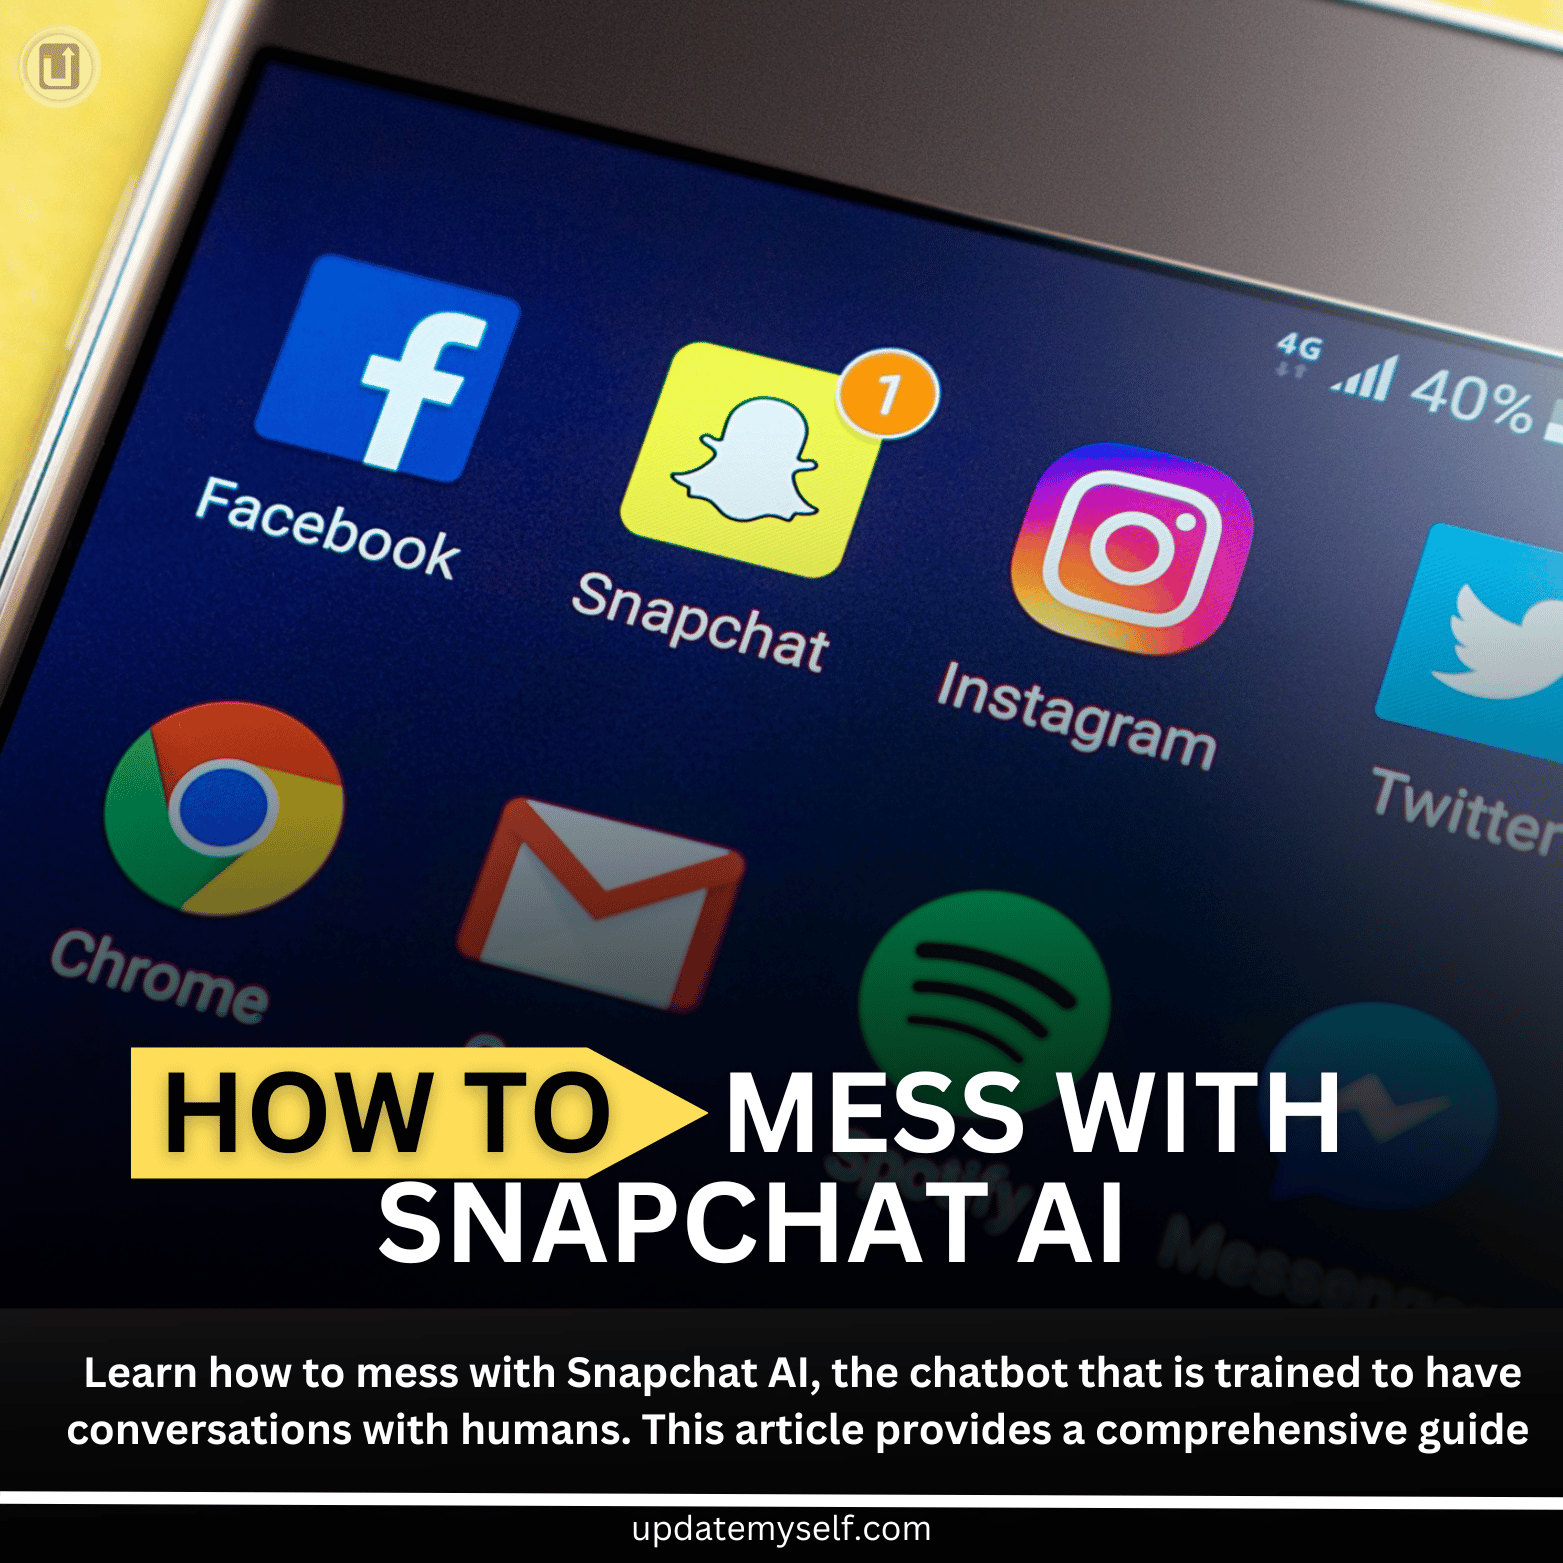 How to mess with Snapchat AI